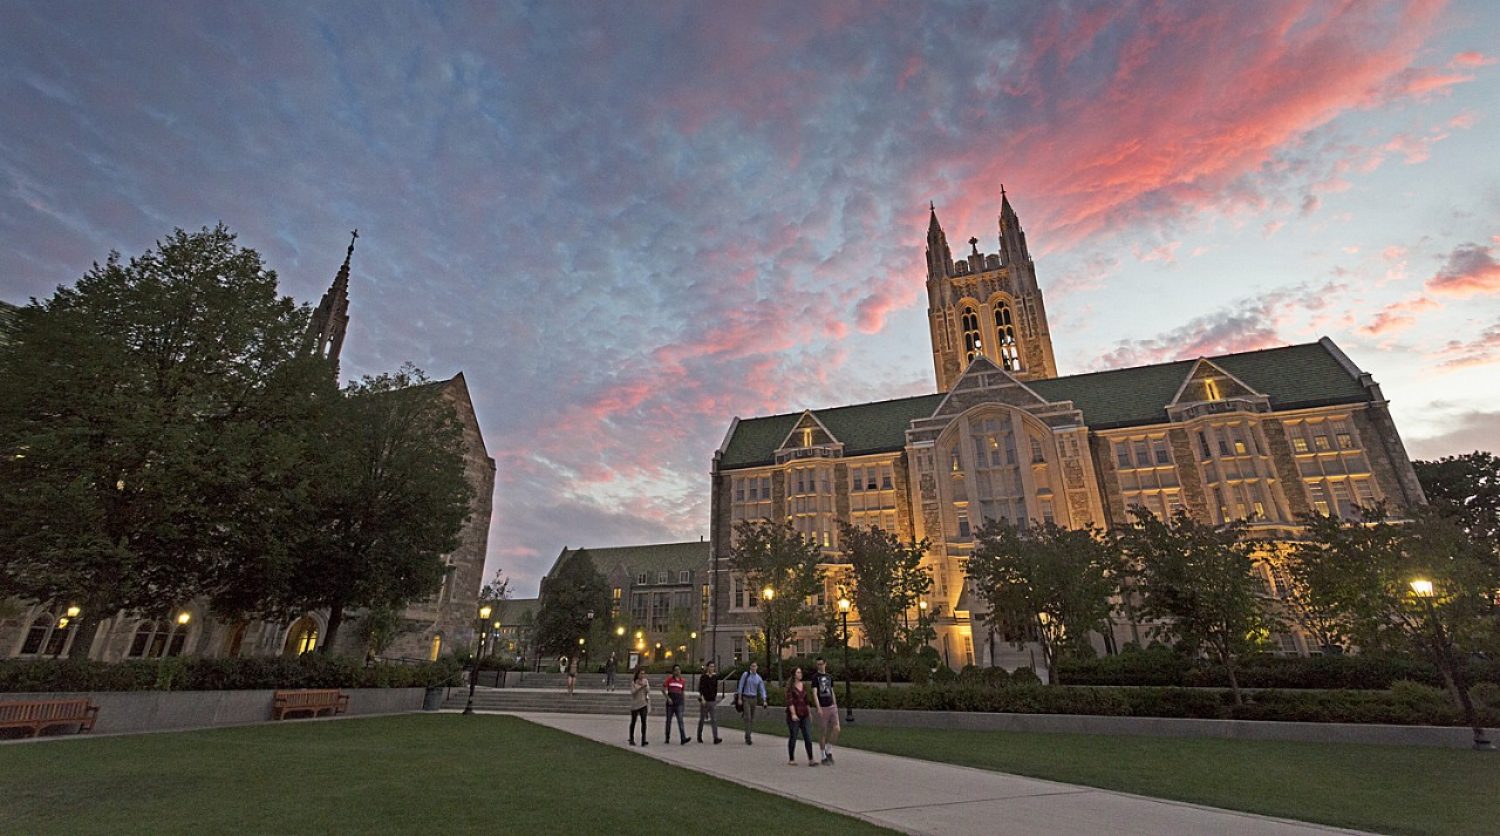 Gasson Tower at sunset